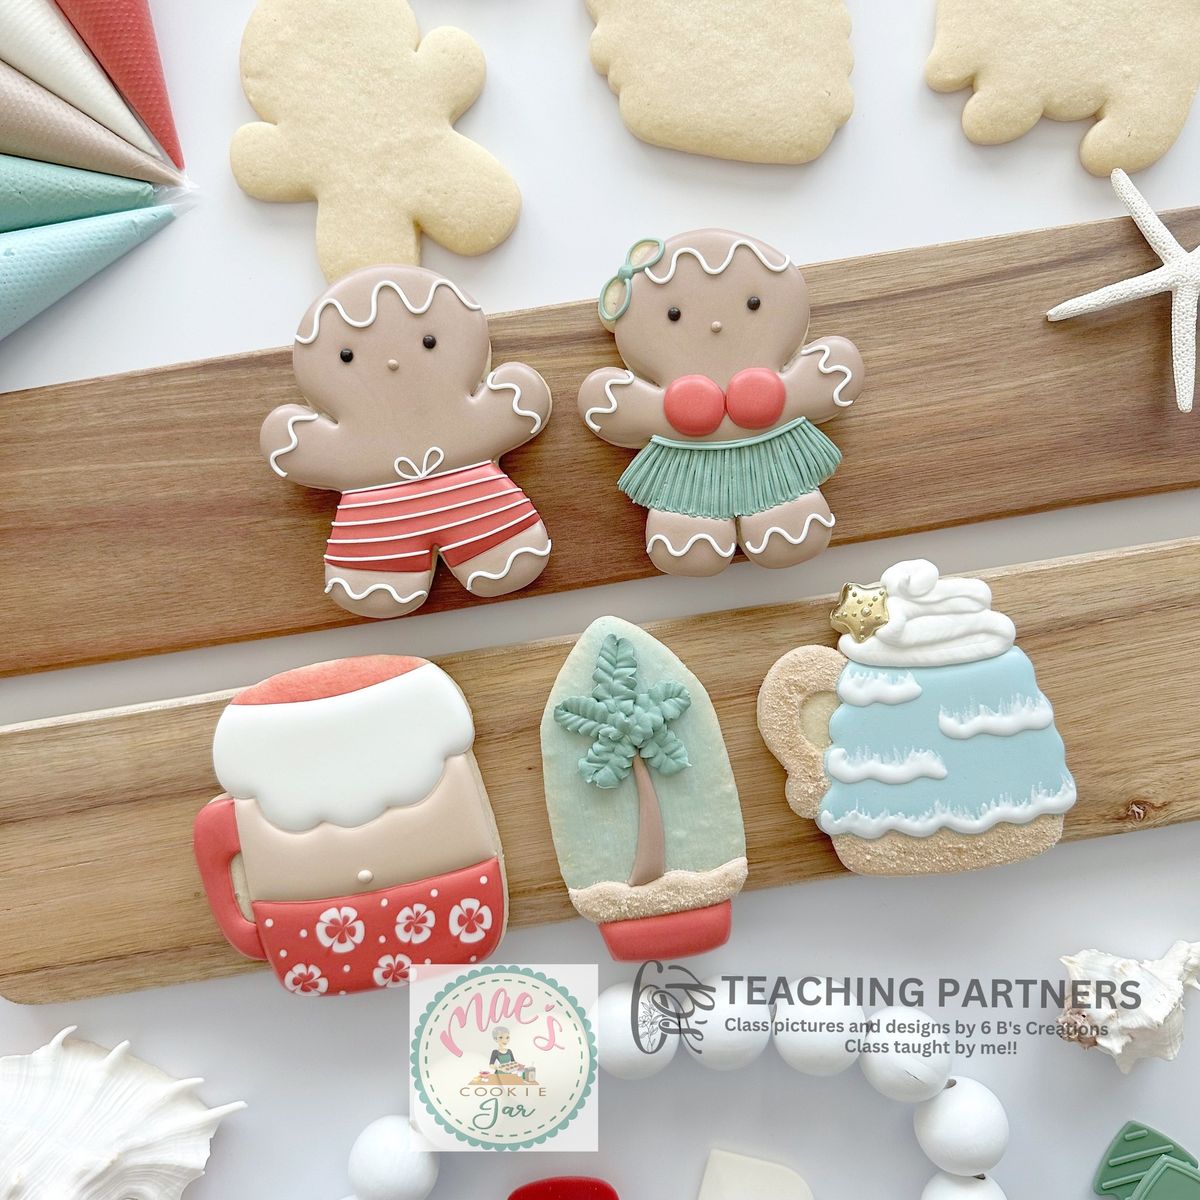 "Christmas in July" themed Cookie decorating class